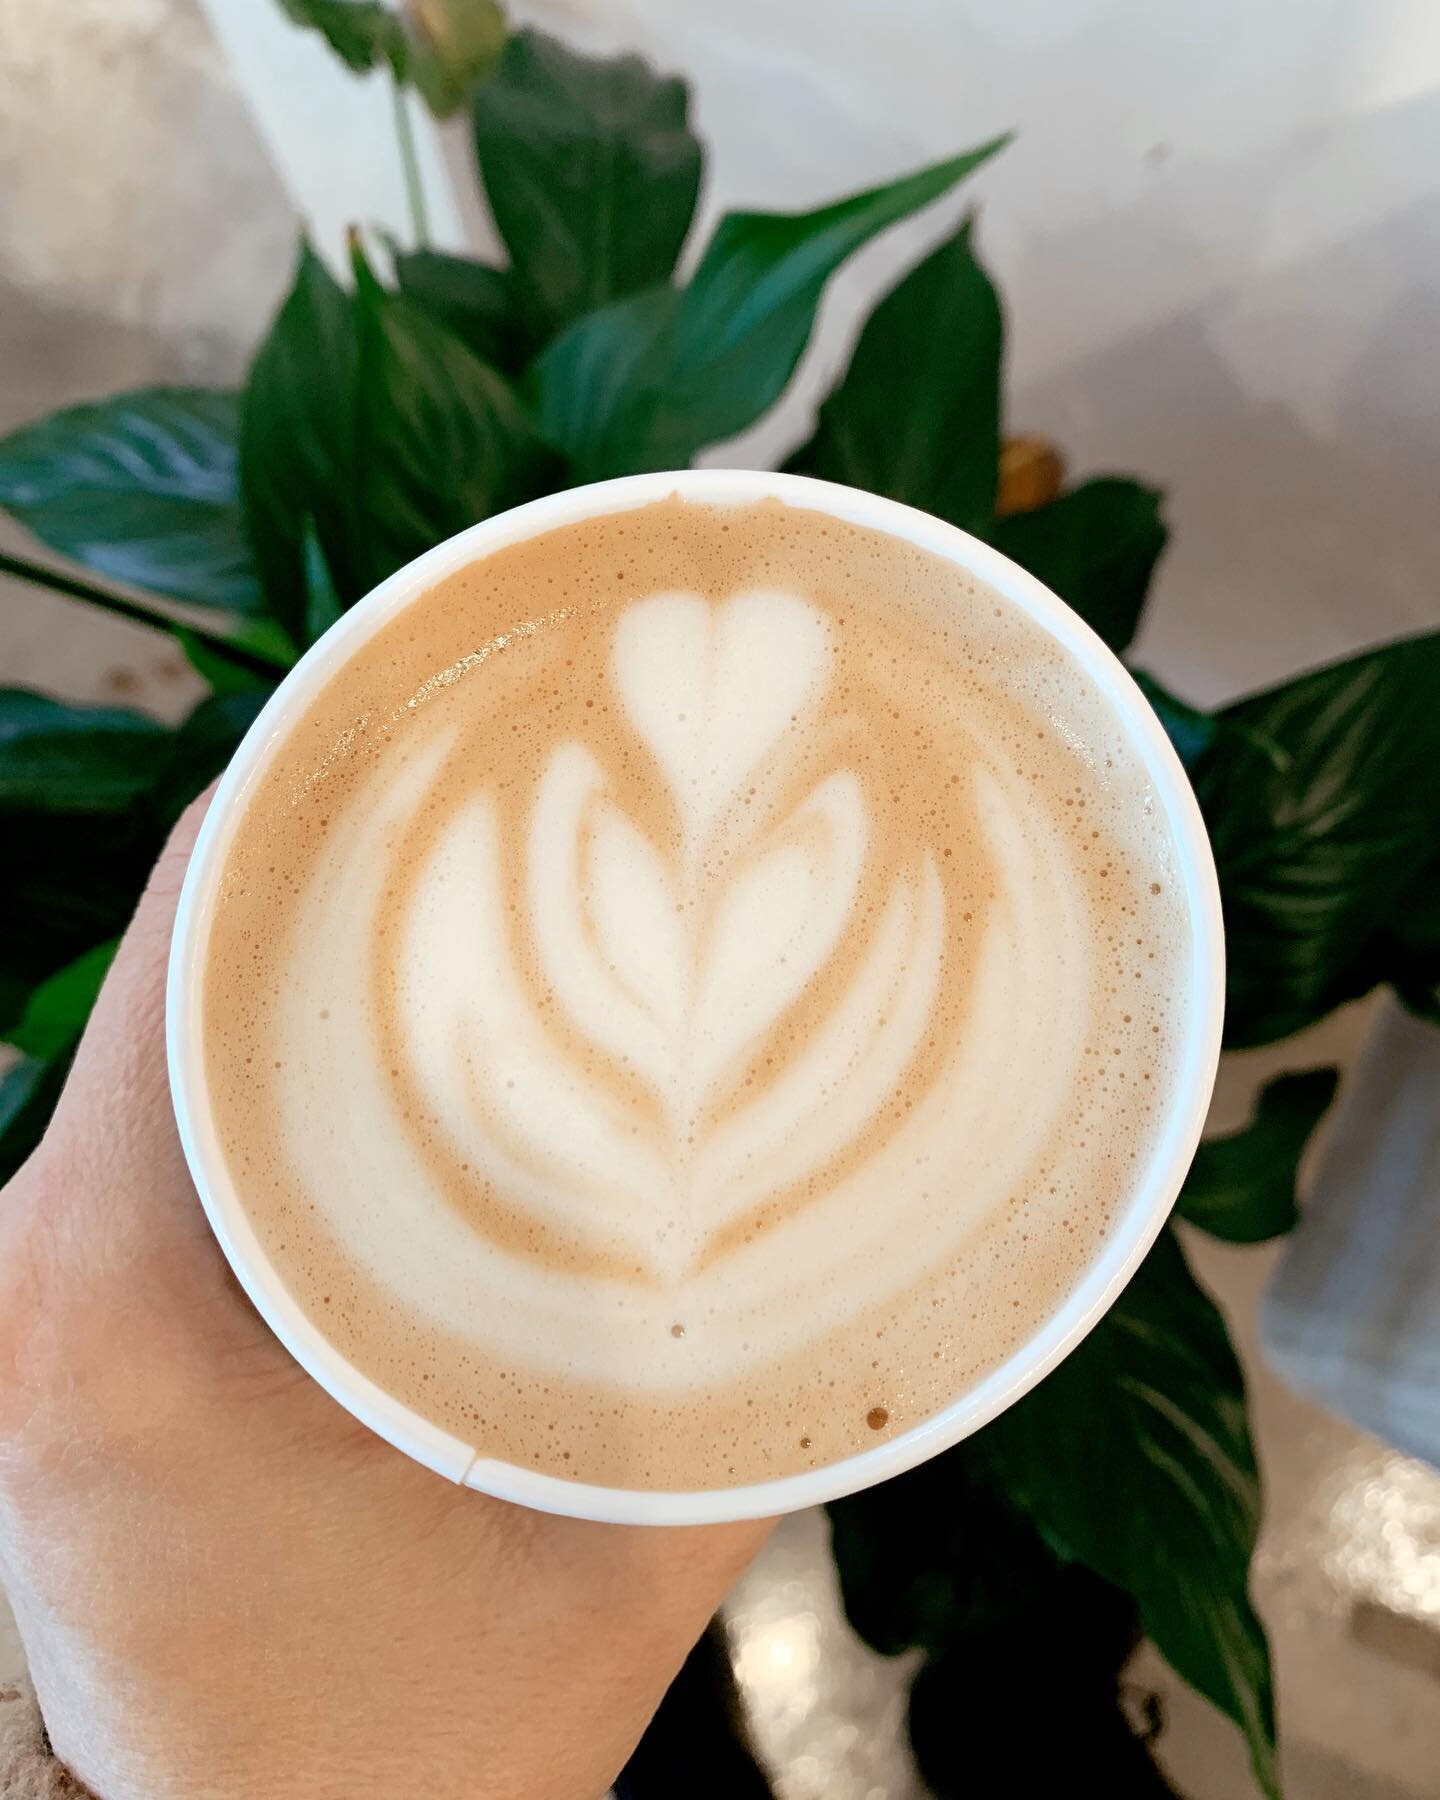 Countdown to our Latte Art Barista throw-down is ON! This Sunday, join us as we come together and support our community super talented Baristas! 

Pop up up vendors, Bites, Raffles, coffee with friends &amp; more! 

Only 4 spots left to compete! Link